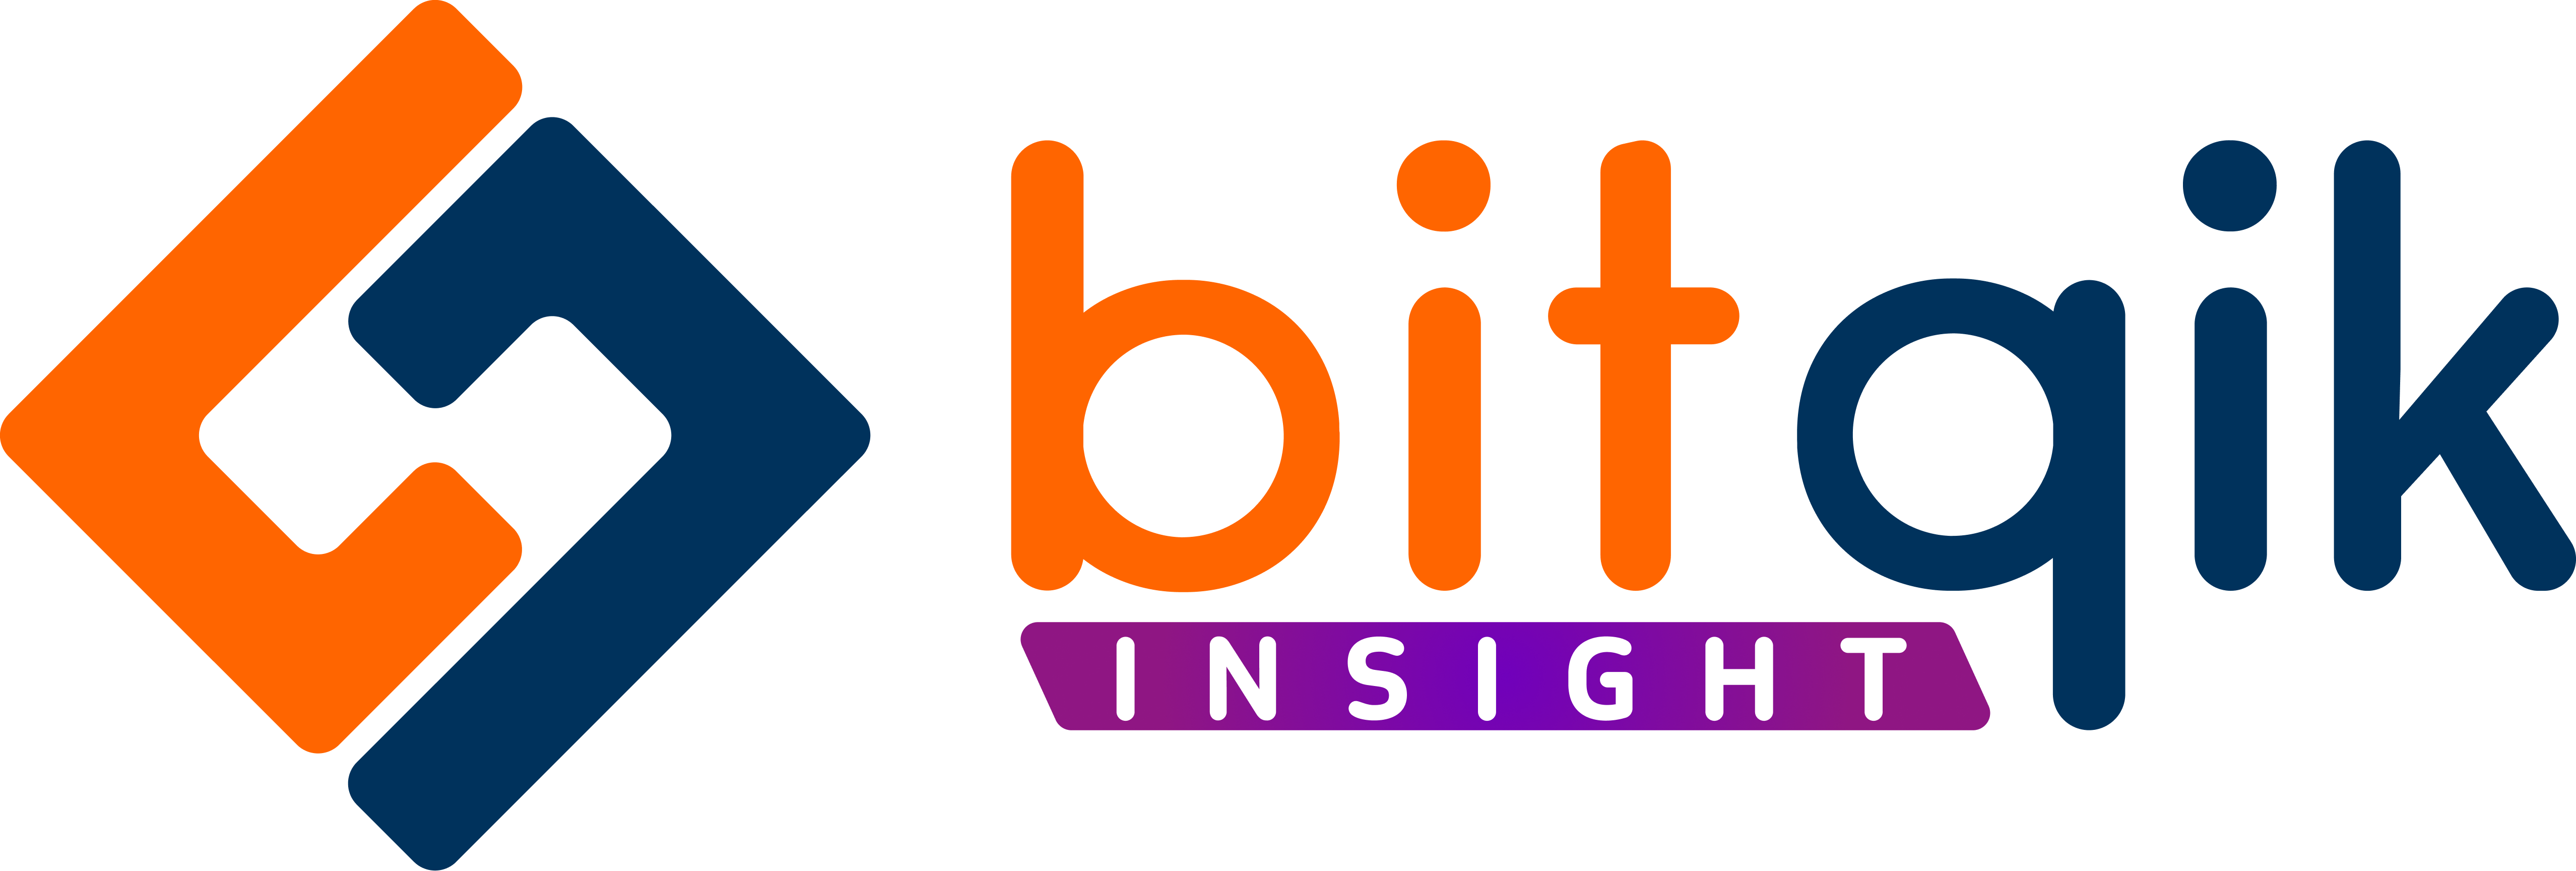 bitqik insight - bitqik INSIGHT, get our latest reports, covering all sorts of topics in the digital asset industry. From finance to economics, trends, and investment.